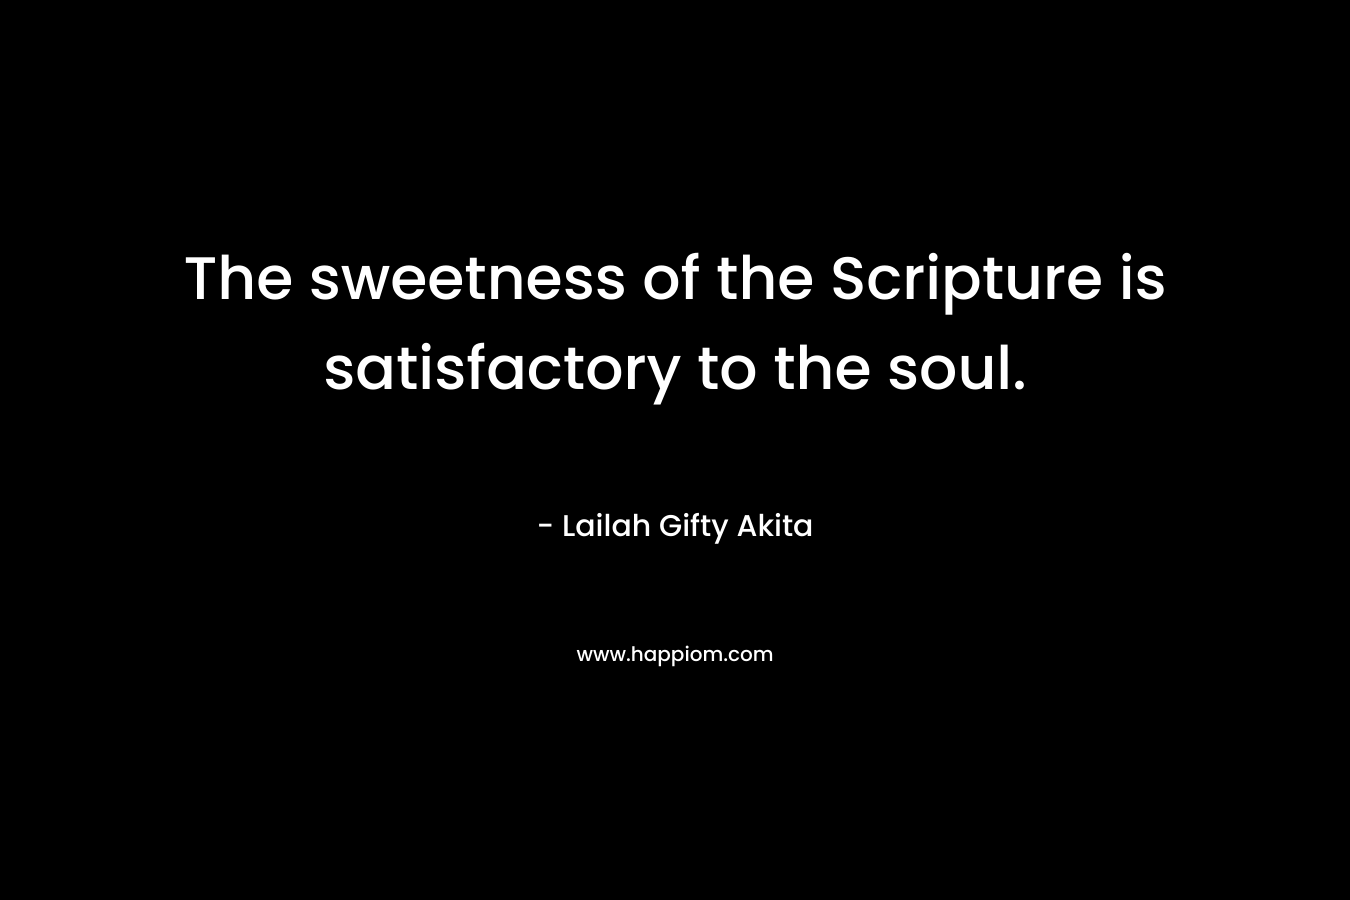 The sweetness of the Scripture is satisfactory to the soul. – Lailah Gifty Akita